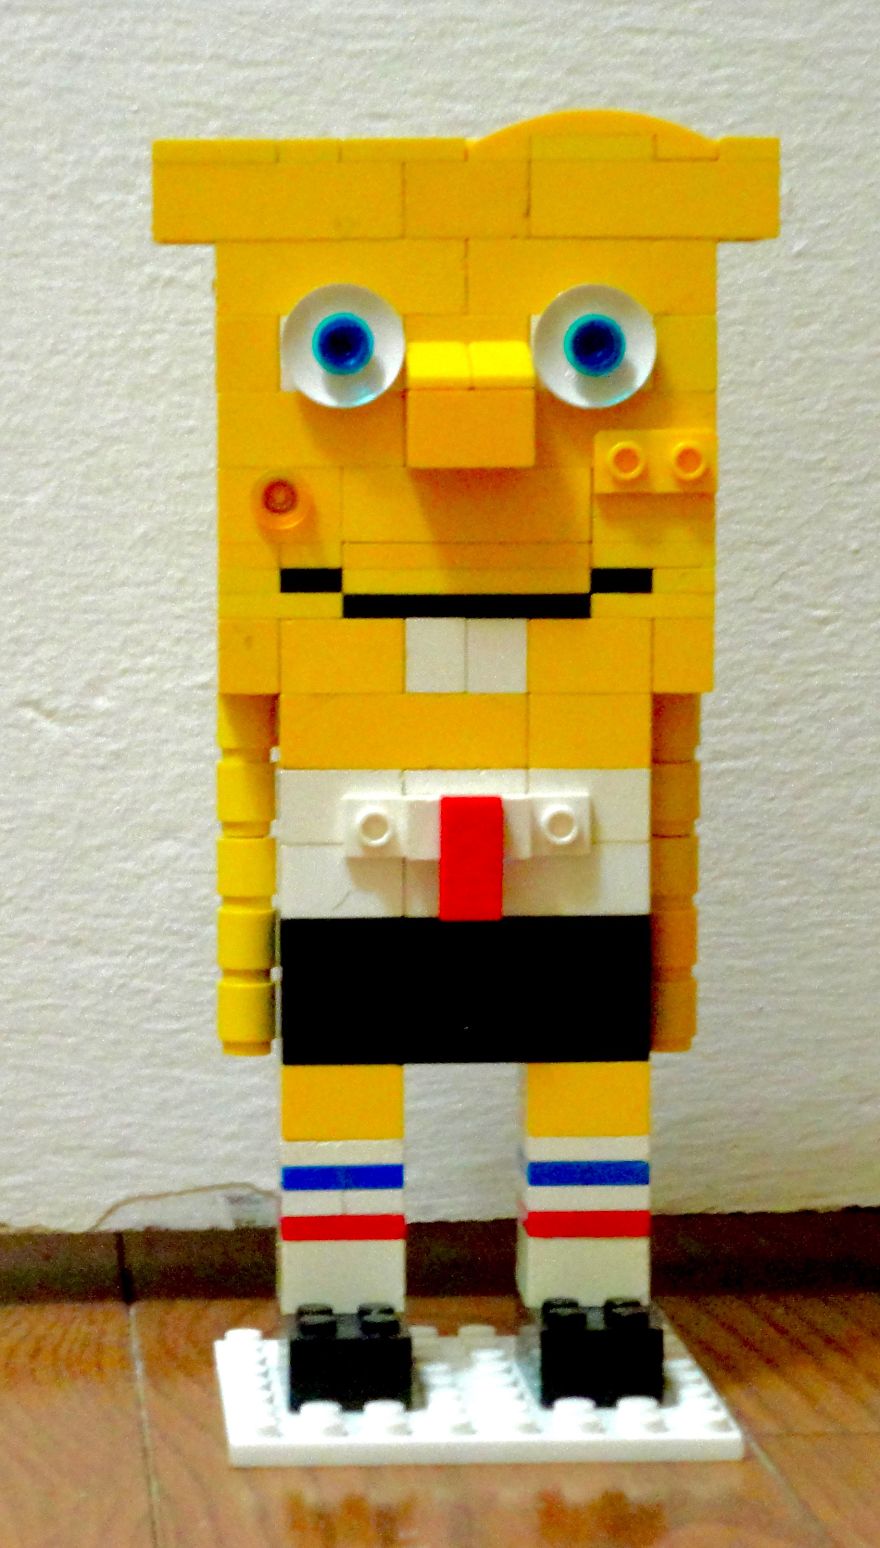 My 4 Year Old Son And I Build His Favourite Characters Out Of Lego, The Results Are Fantastic.